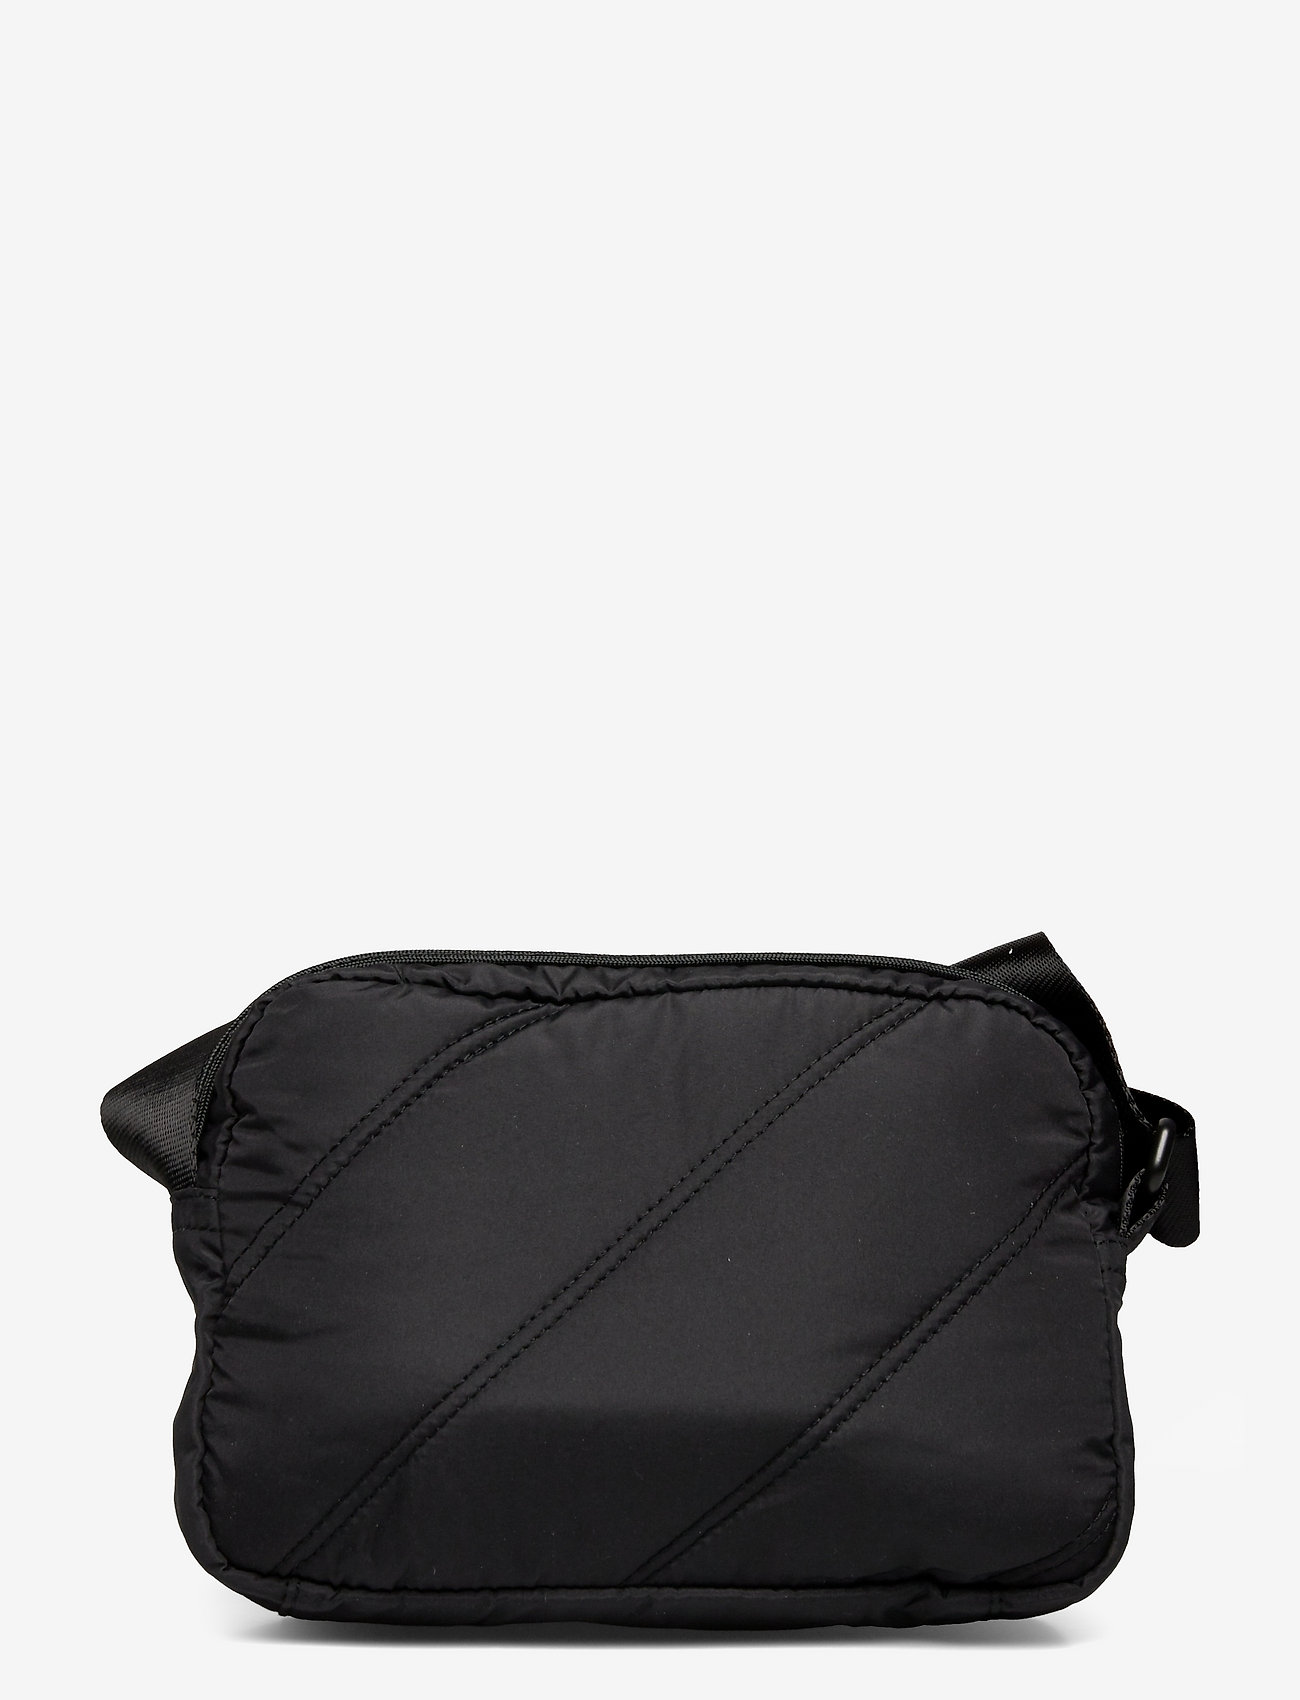 Ganni - Quilted Recycled Tech - black - 1